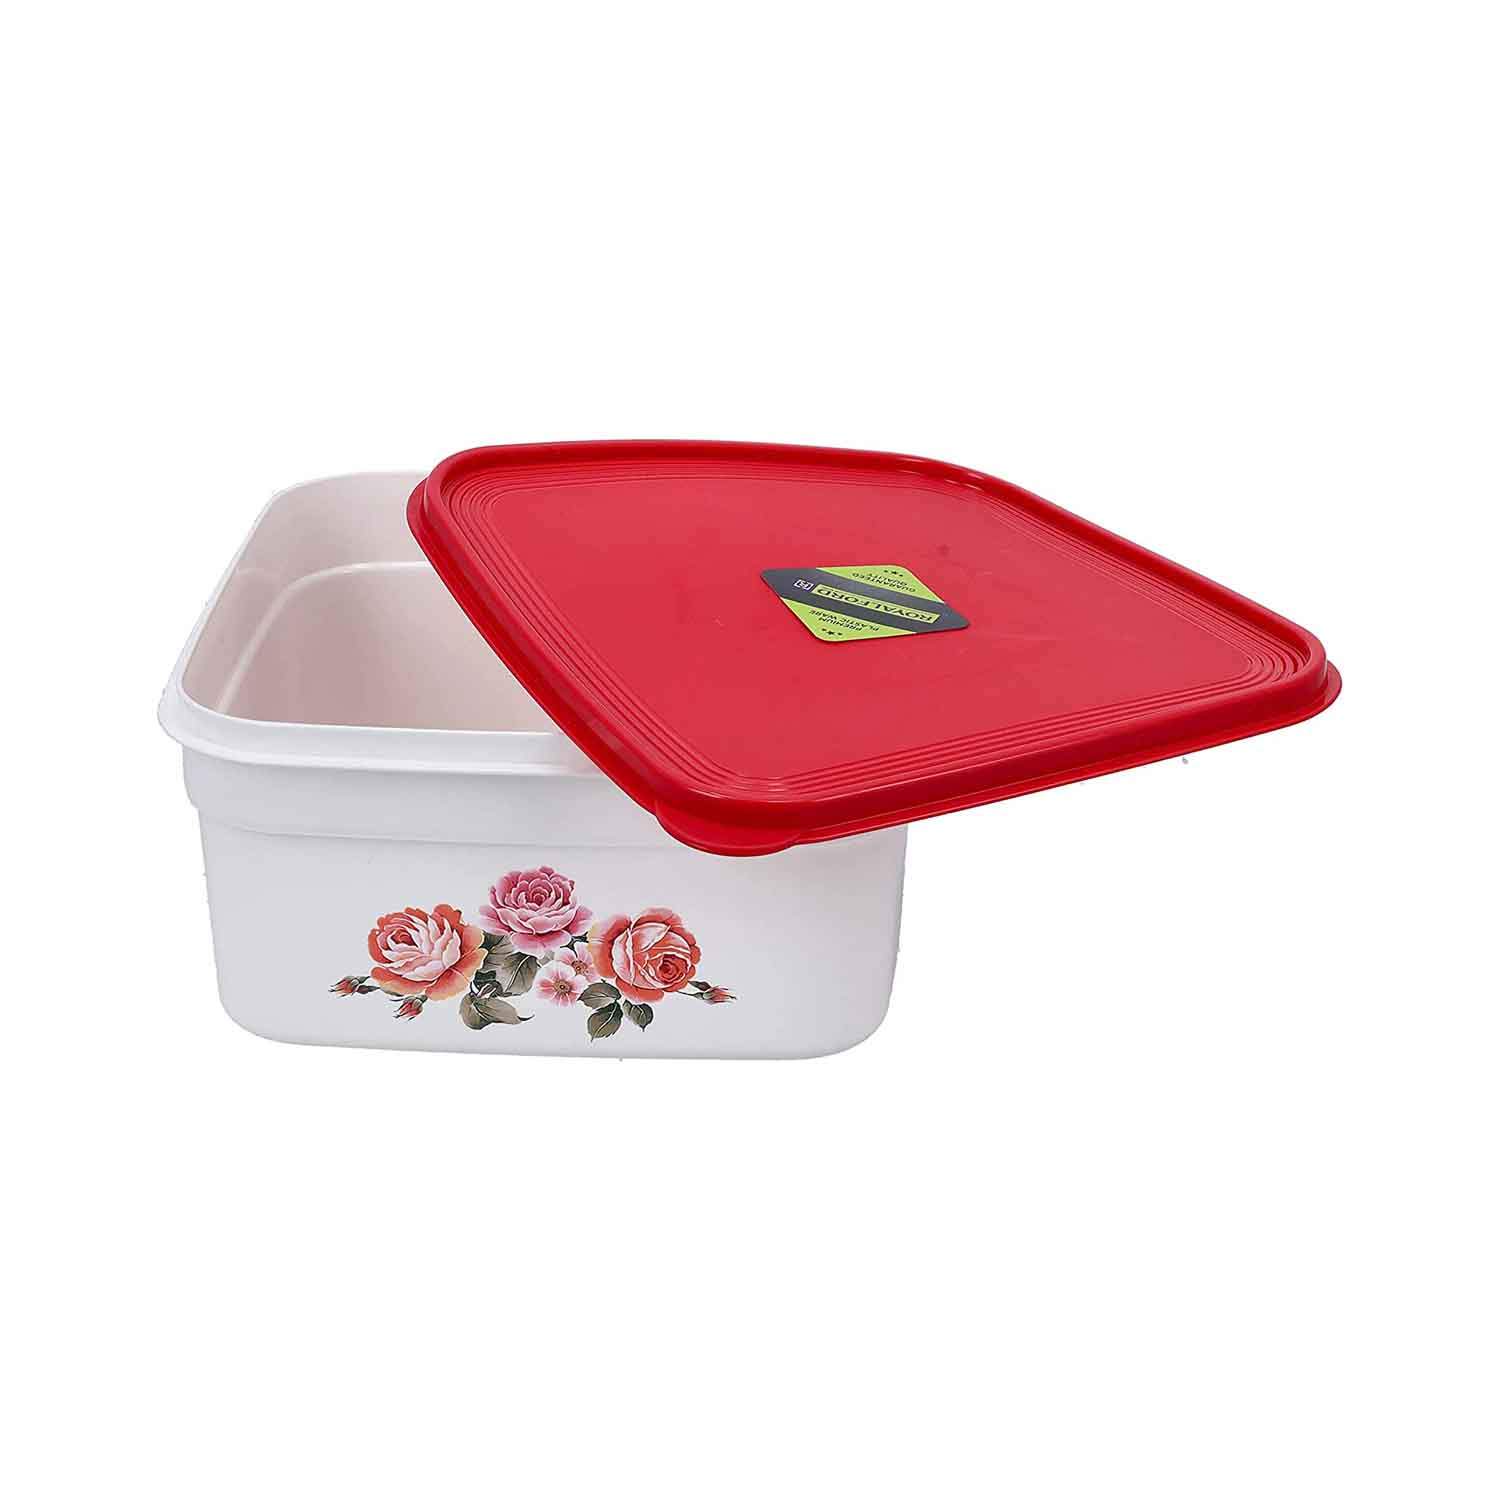 Royalford Square Storage Bowl, 3L Plastic Food Container, Rf10872 | Air-Tight Lid Bpa-Free Box | Suitable For Dishwasher, Freezer | Meal Prep Storage Tubs